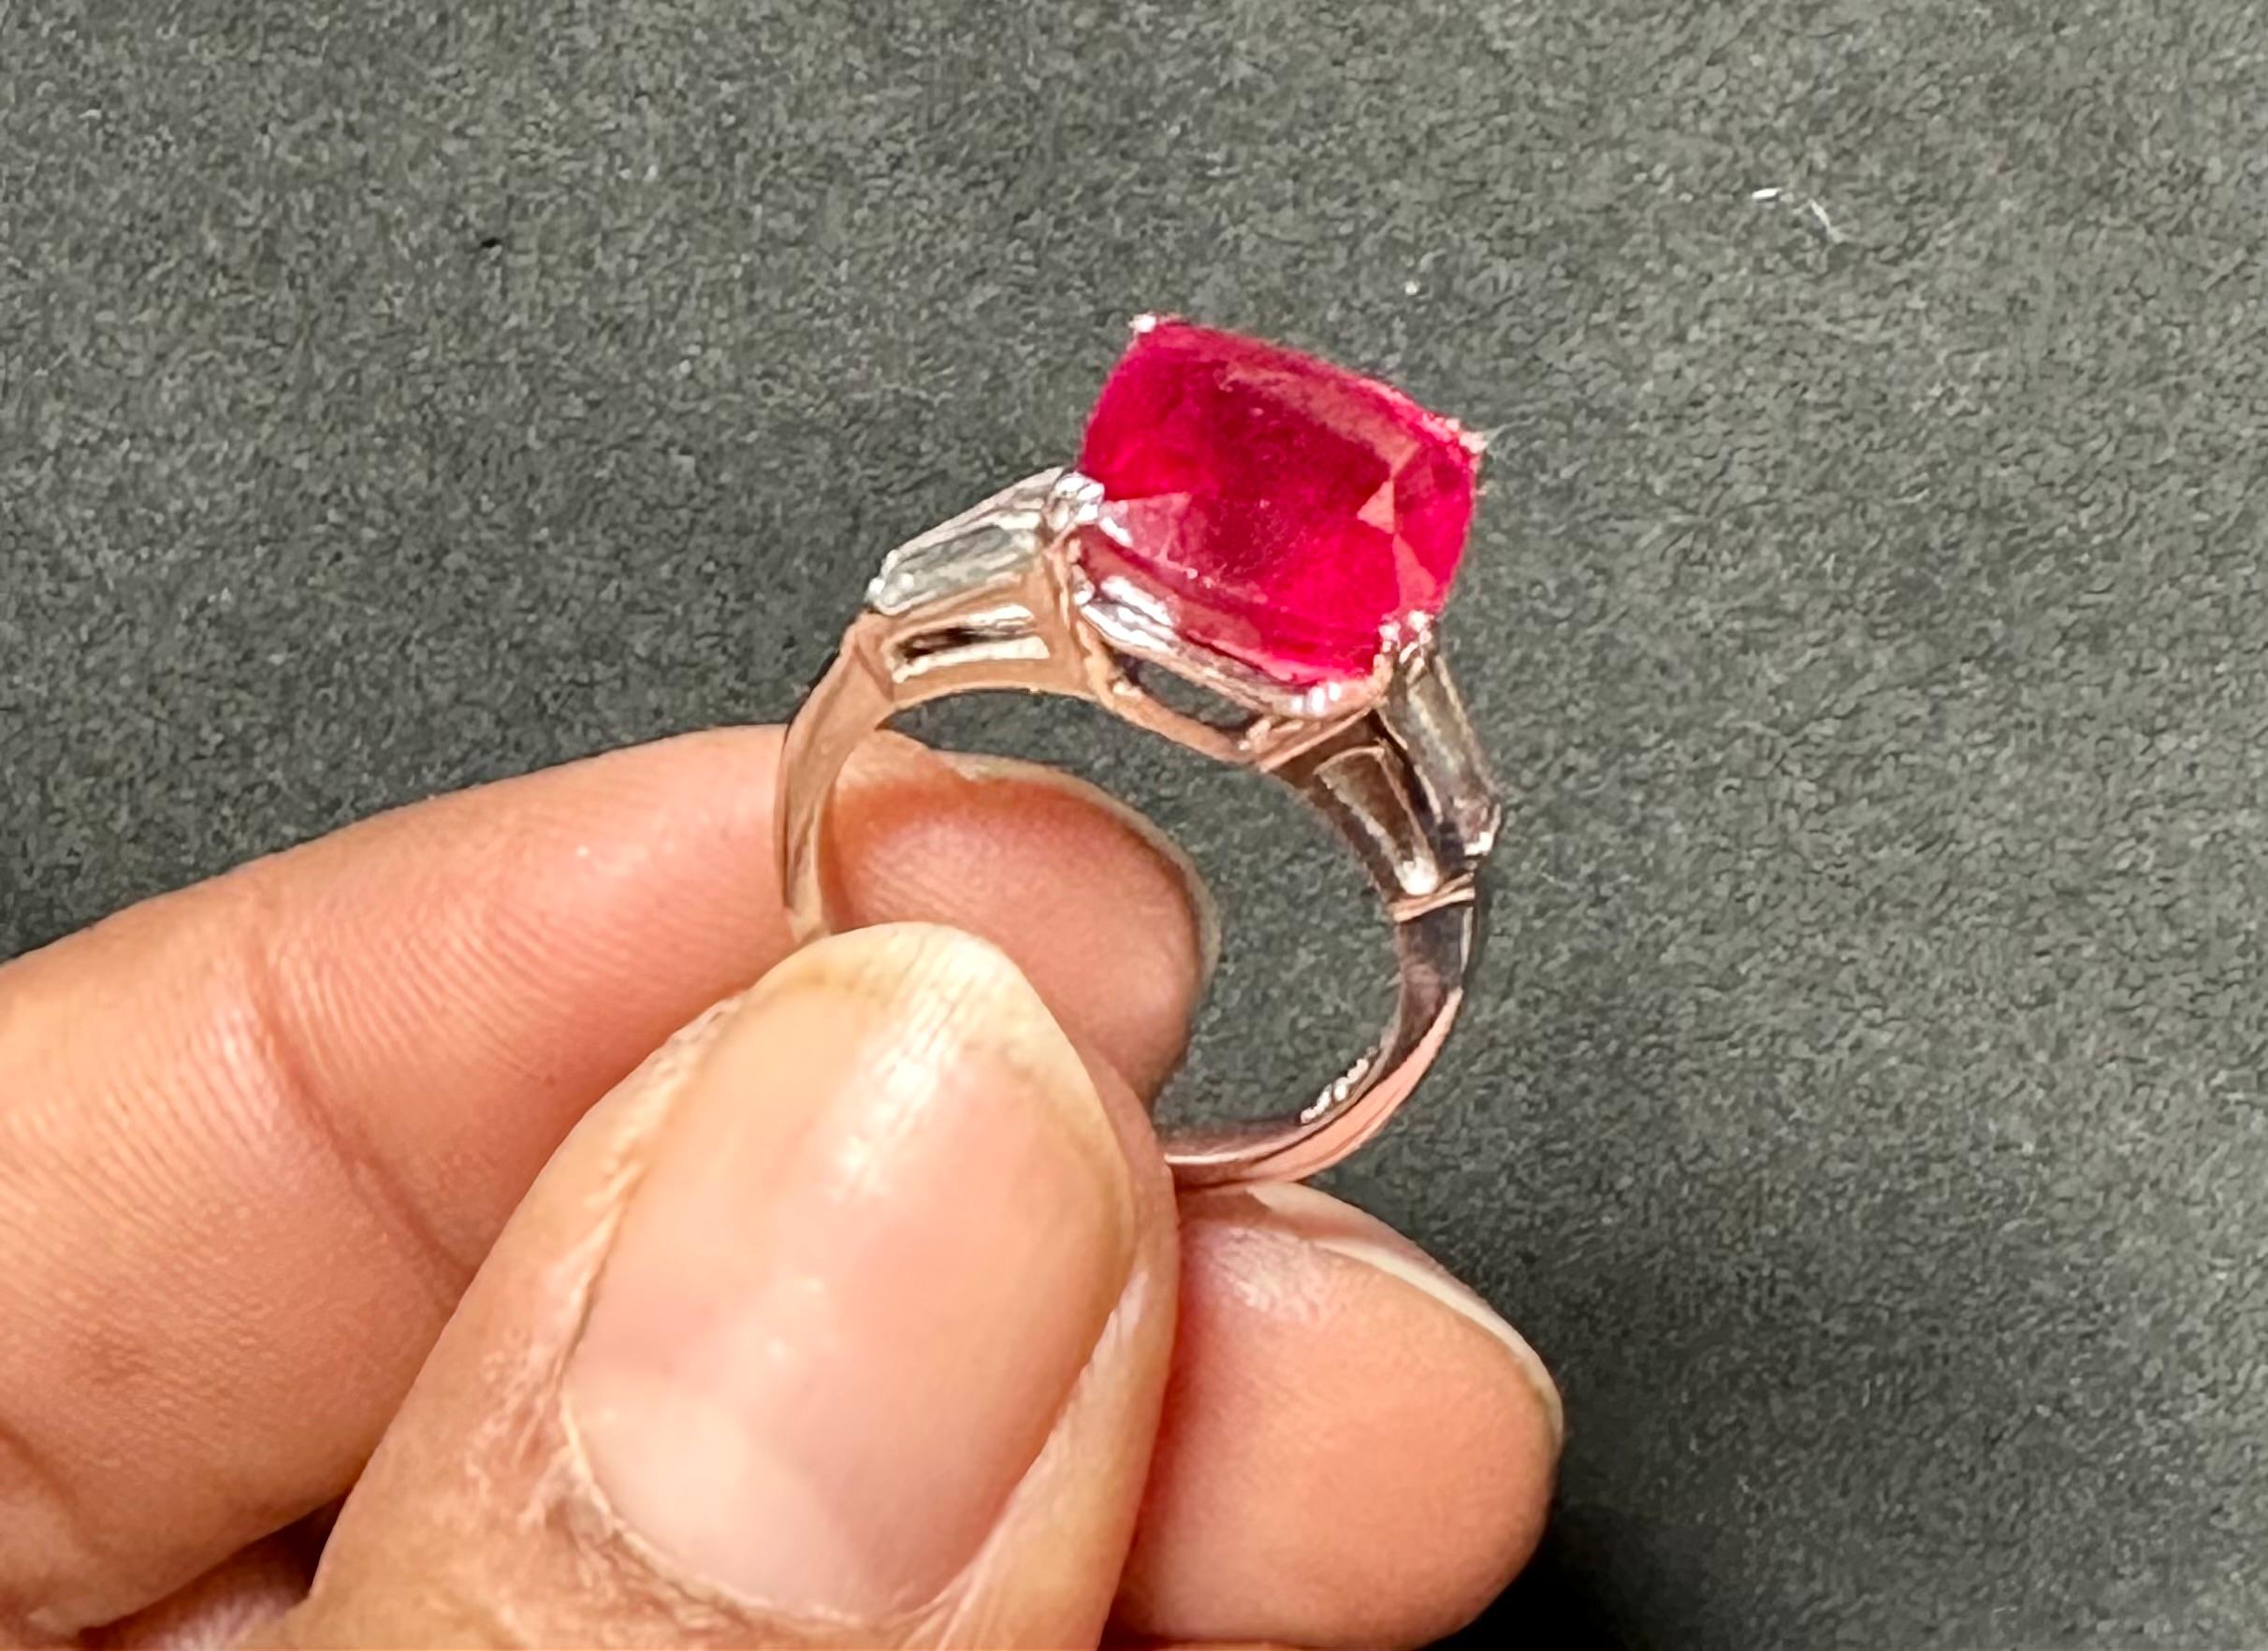 Introducing our stunning 14 Karat White Gold Ring featuring a captivating 5 carat cushion treated ruby. This prong-set ruby is the centerpiece of the ring, exuding a mesmerizing beauty.

Crafted with 14 Karat White Gold, this ring weighs 4 grams,